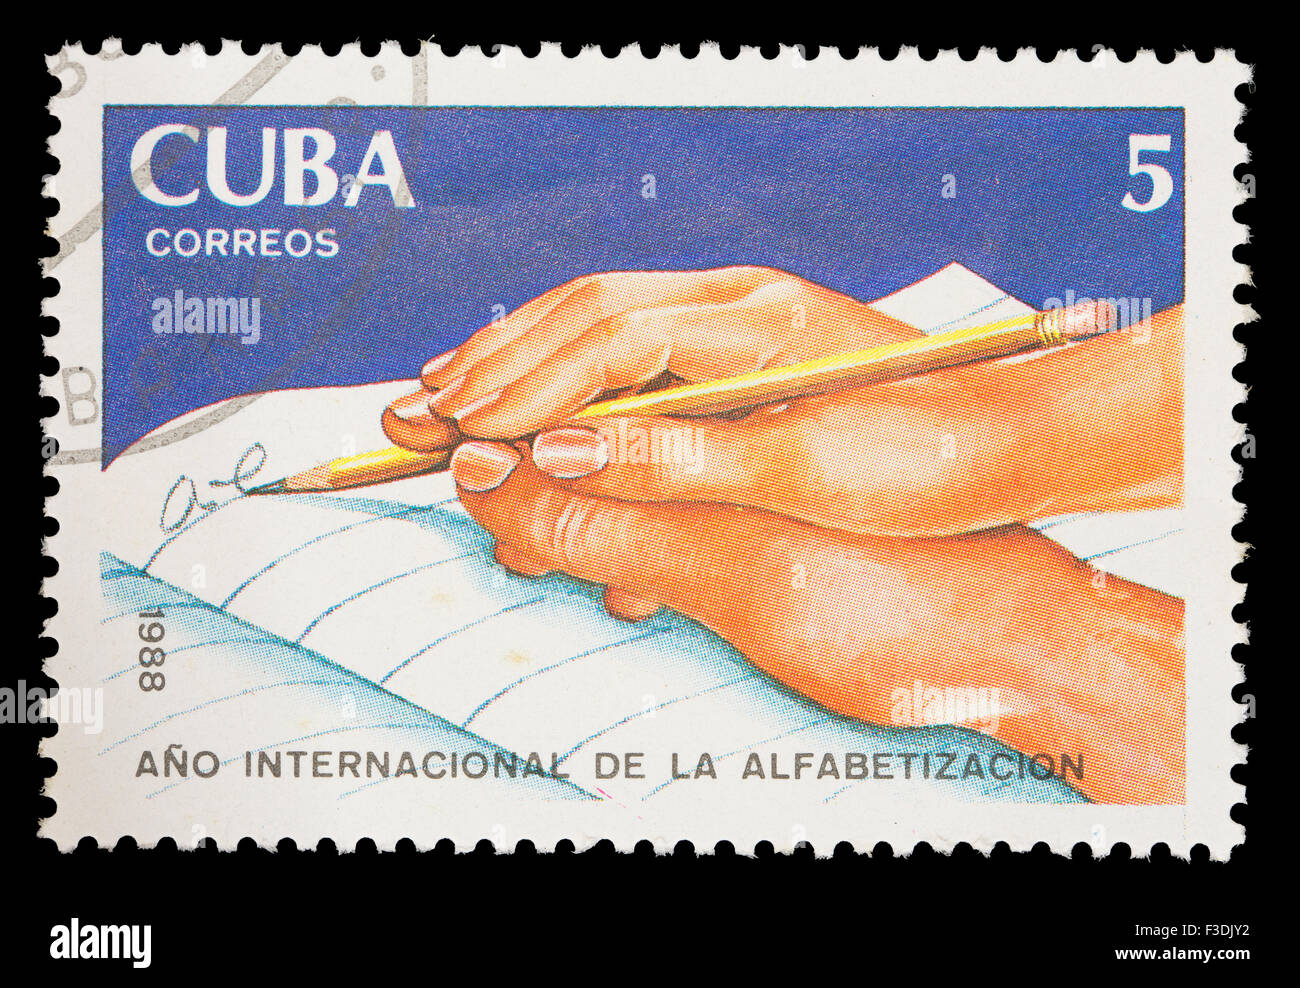 CUBA - CIRCA 1988: A postage stamp printed in Cuba shows a hand helping someone else to write, International Literacy year, circ Stock Photo